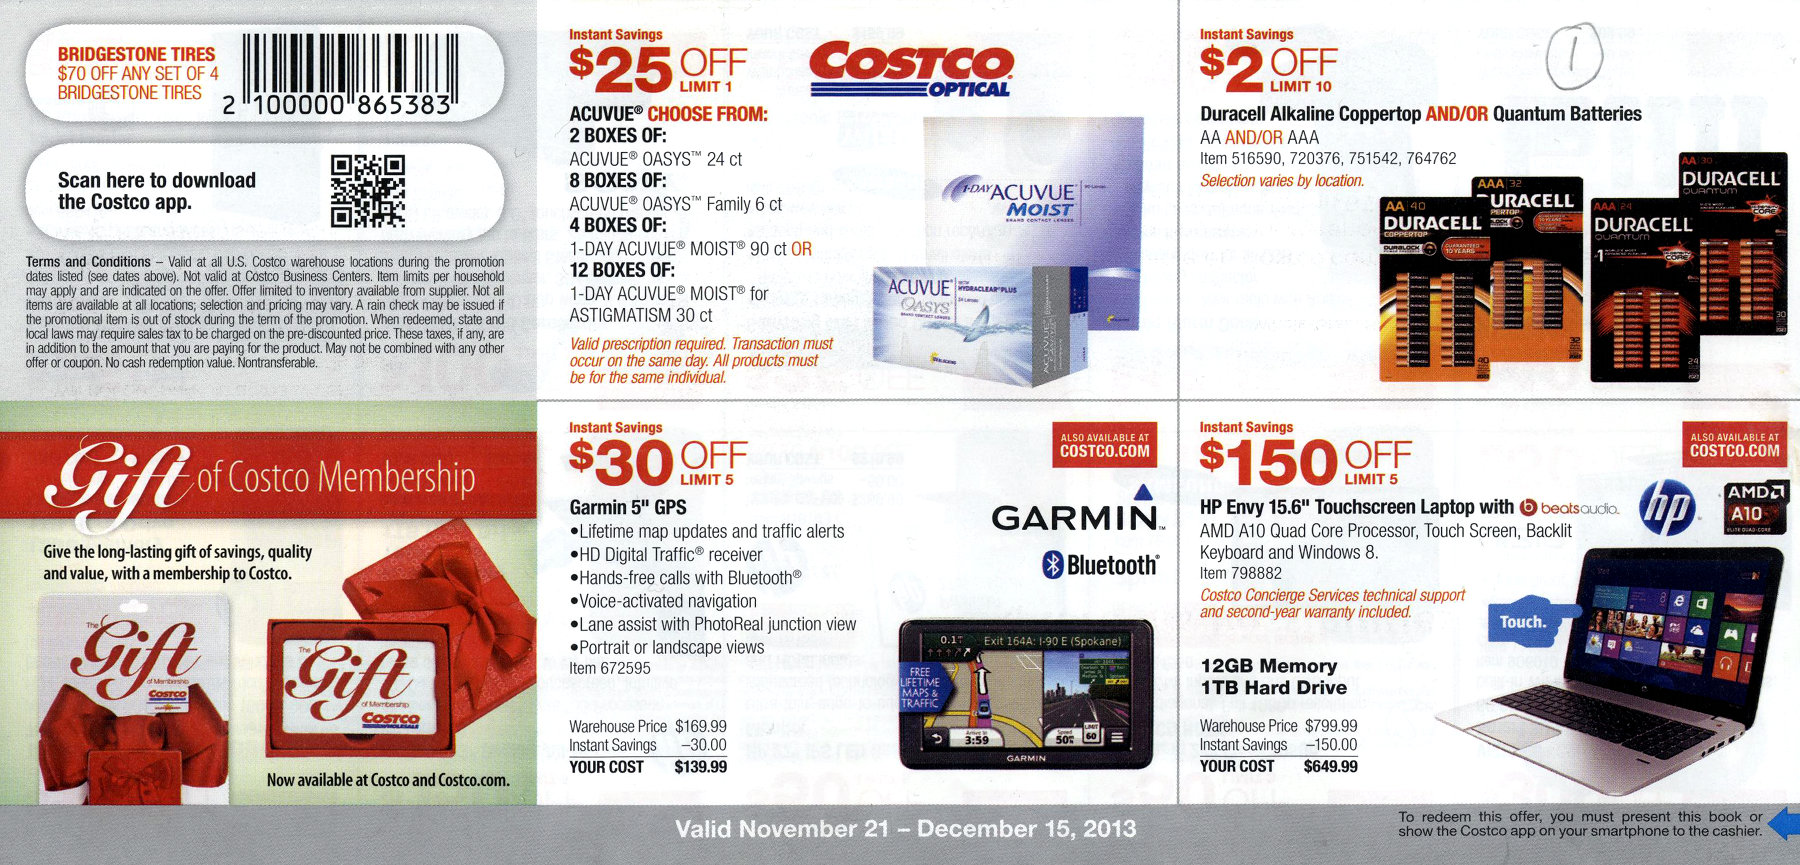 Coupon book full size page -> 1 <-